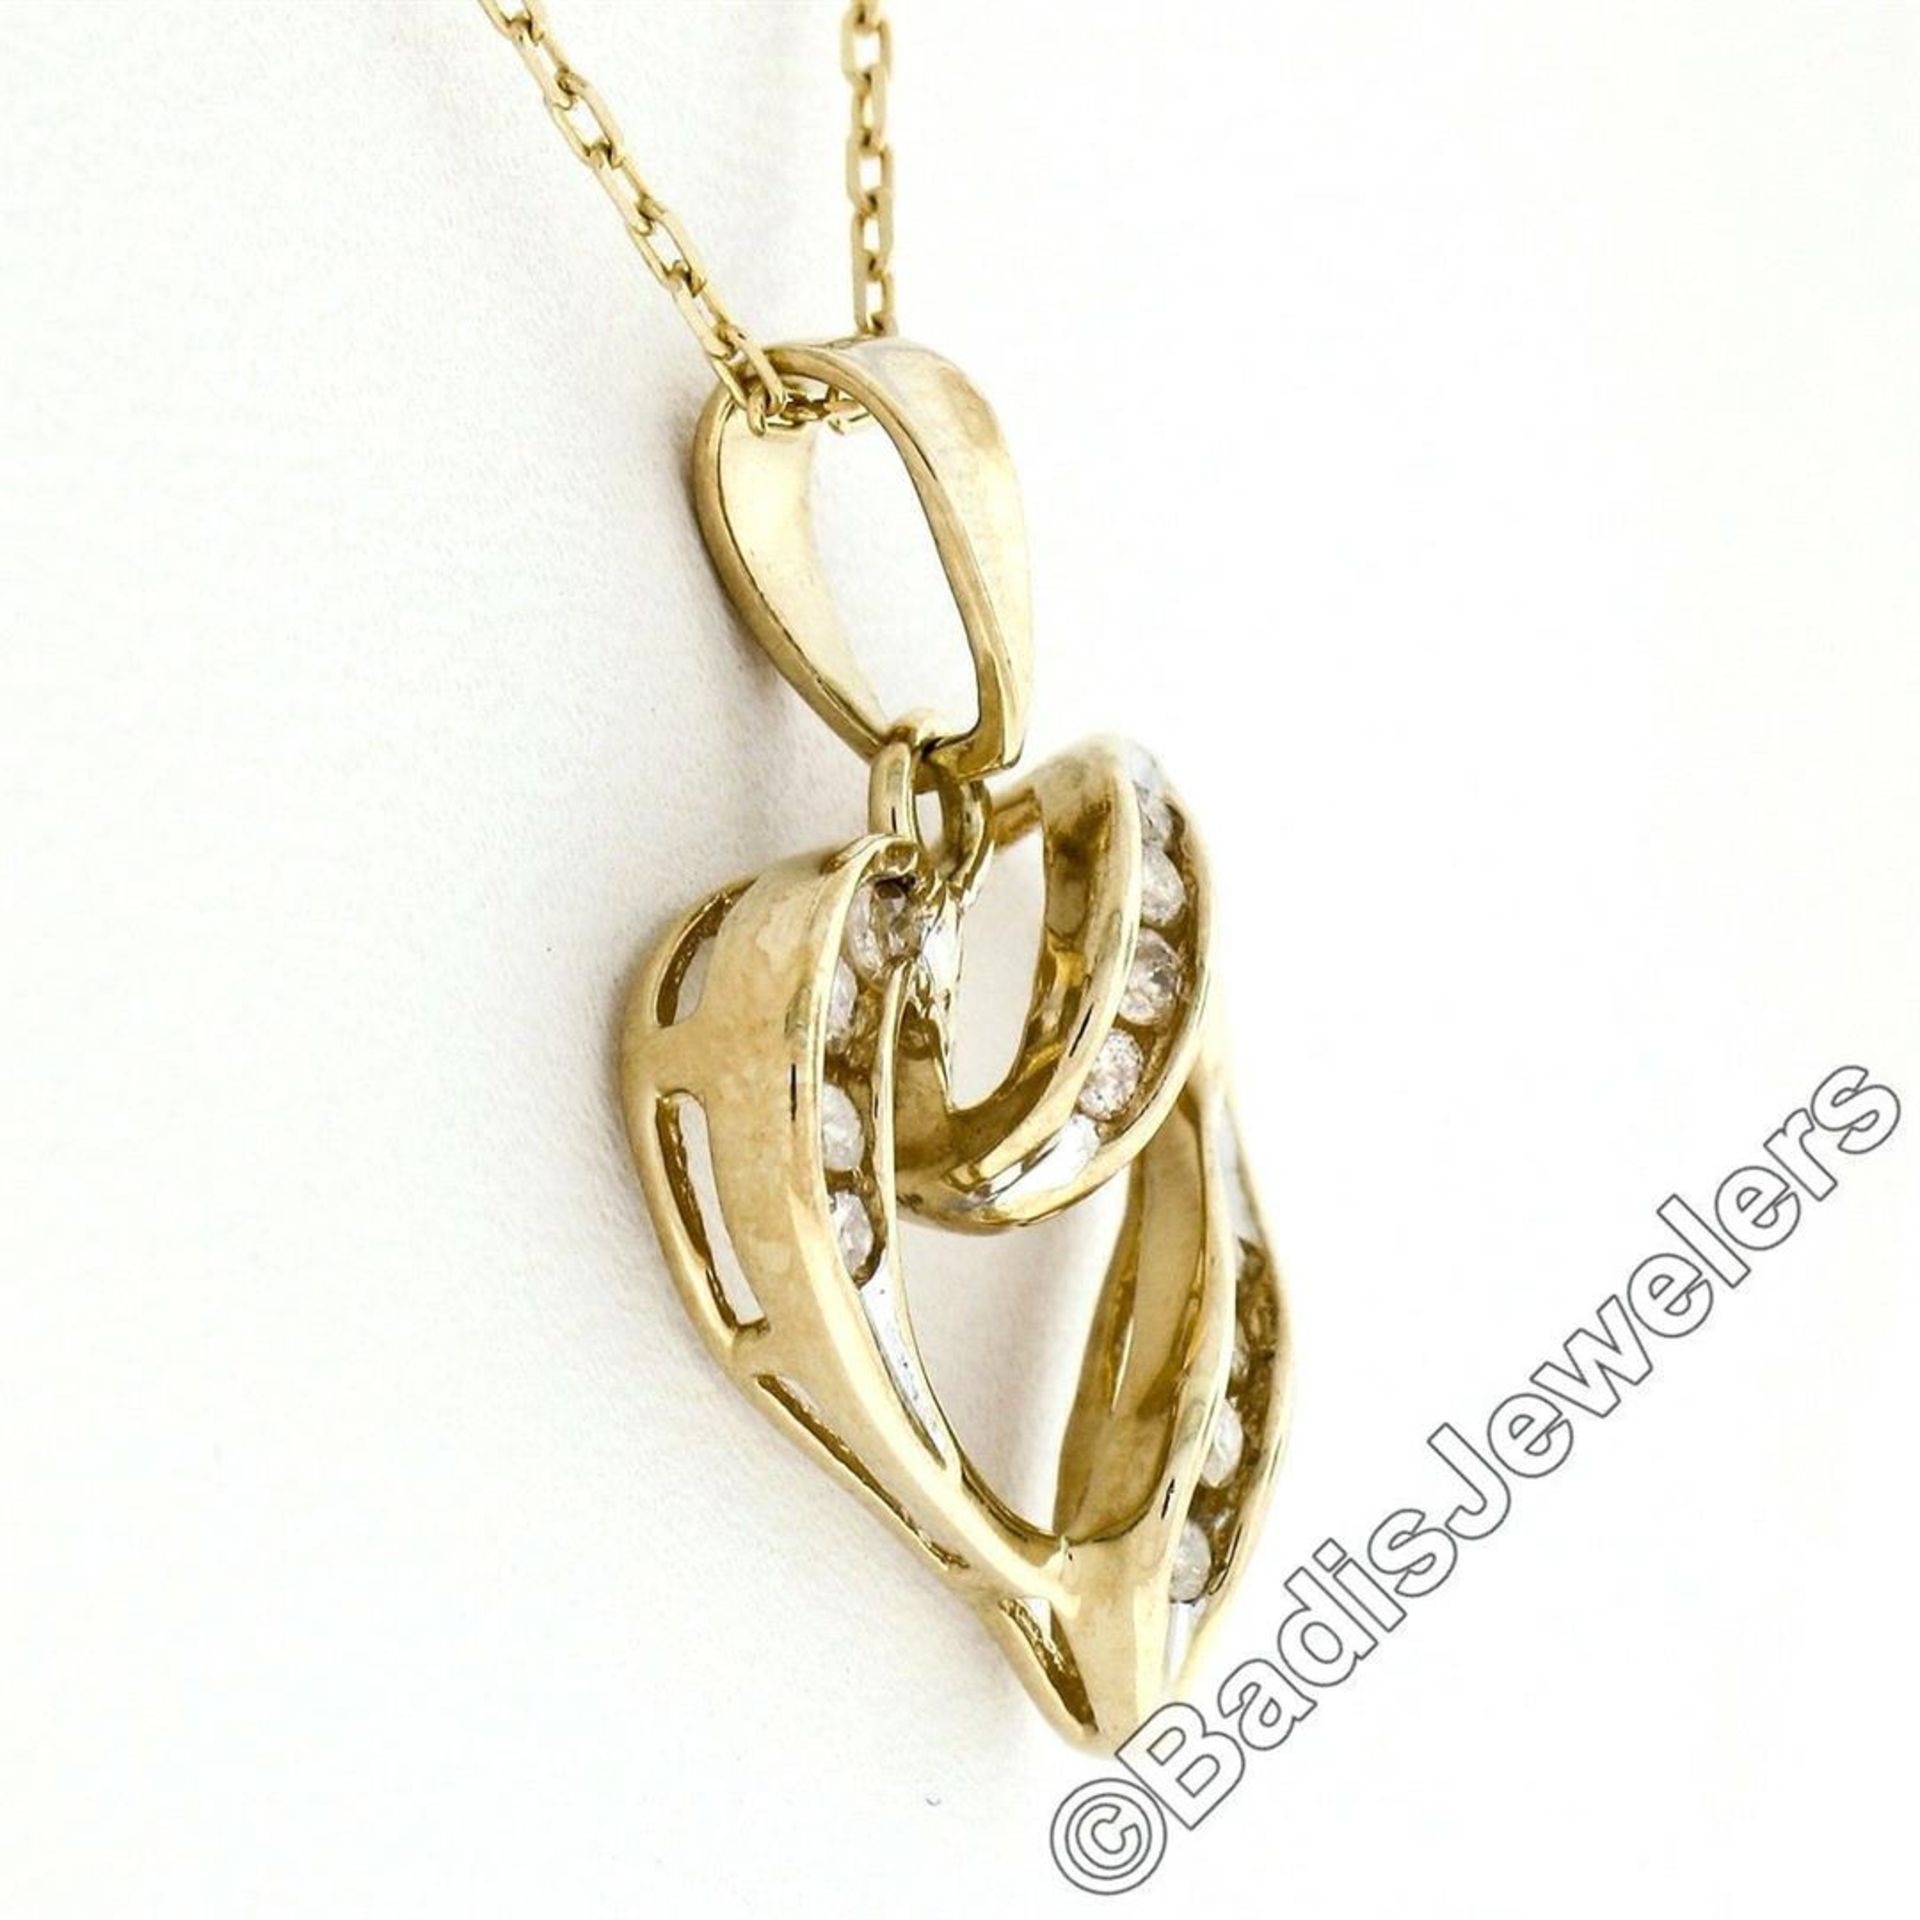 10kt Yellow Gold 0.26 ctw Channel Set Round Diamond Open Heart Pendant Necklace - Image 5 of 7